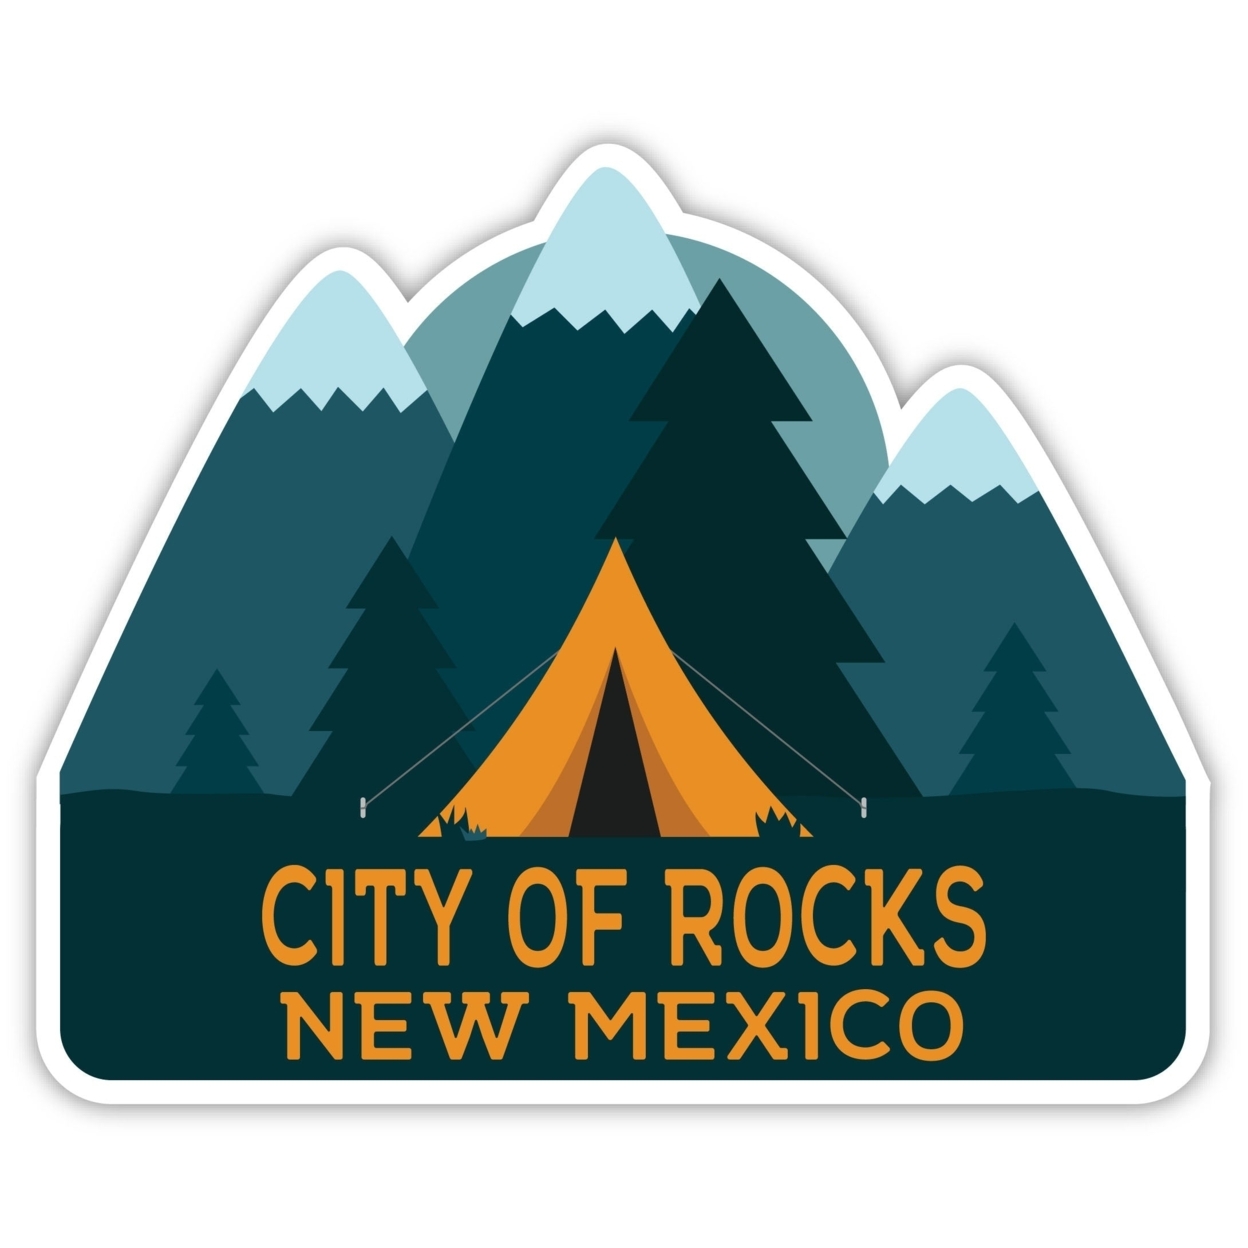 City Of Rocks New Mexico Souvenir Decorative Stickers (Choose Theme And Size) - 4-Pack, 10-Inch, Tent